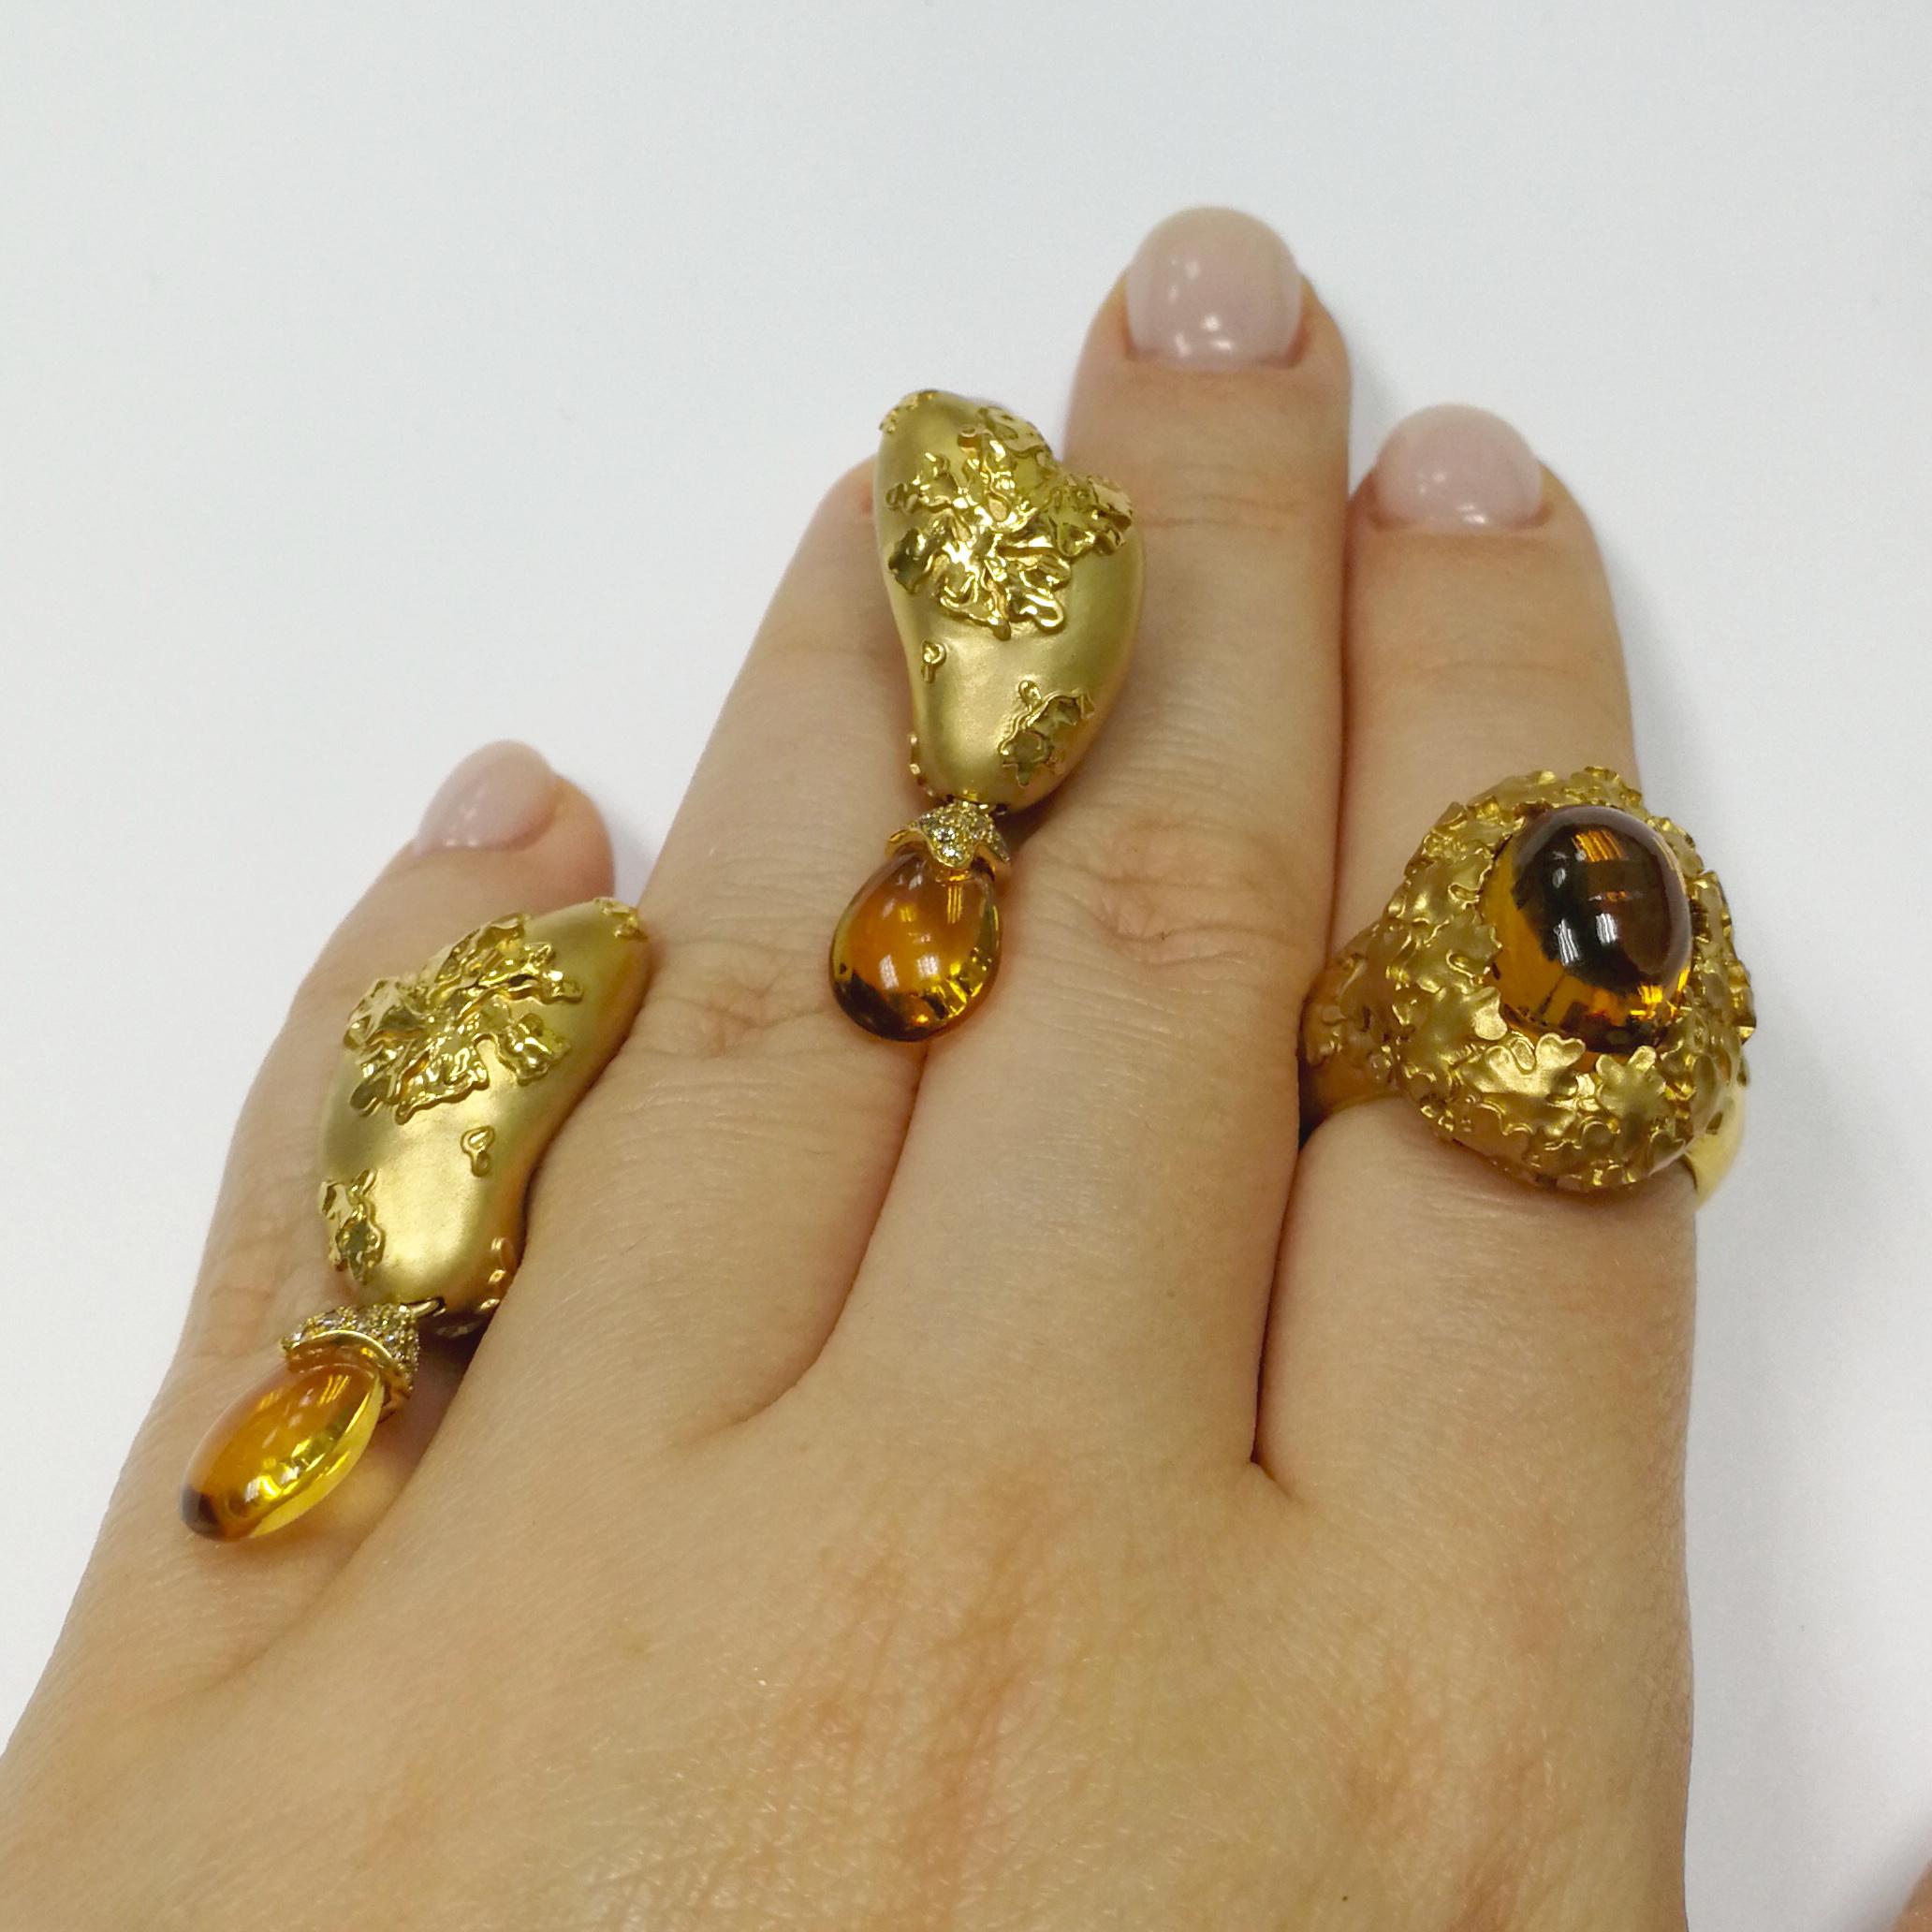 Citrine Champagne Diamonds 18 Karat Yellow Gold Moss Suite
Moss is an amazing plant that grows in moist forests, does not take root and has no leaves. Moss is diverse in its color. Our Suite is made in 18 Karat Yellow Gold. In the Ring, you can see